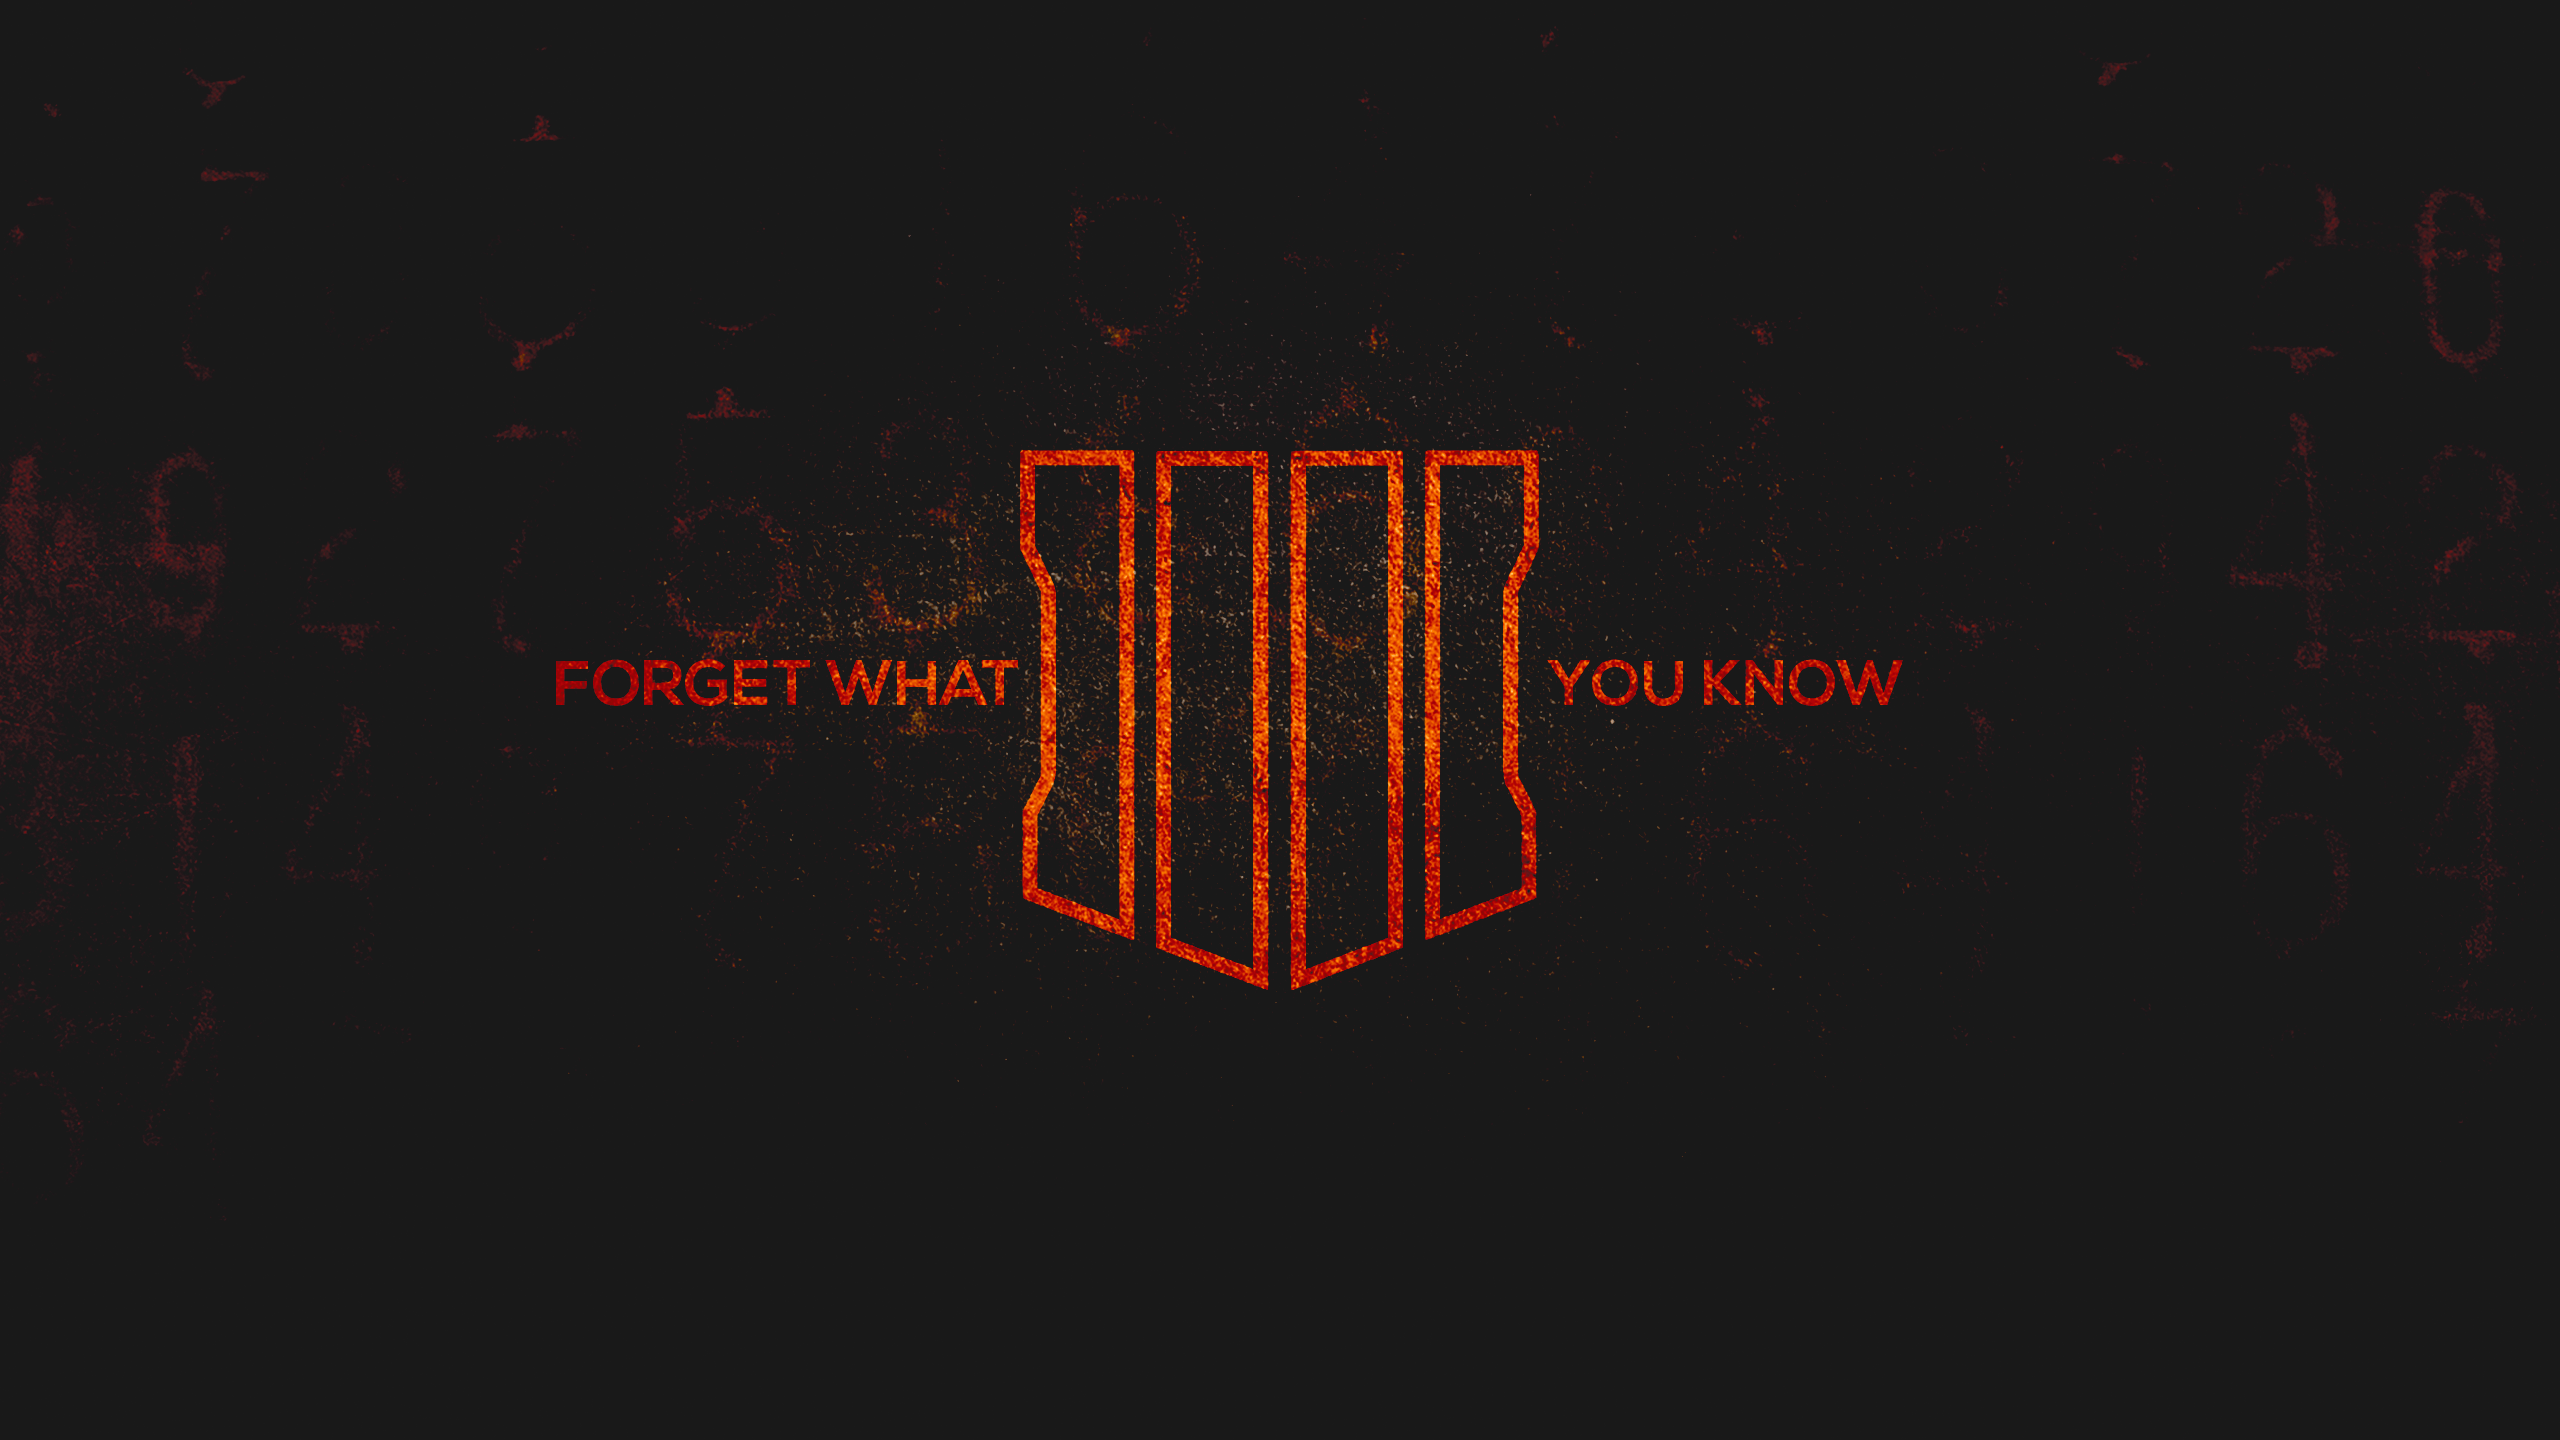 Call of Duty: BO4 (FORGET WHAT YOU KNOW) Full HD Wallpaper